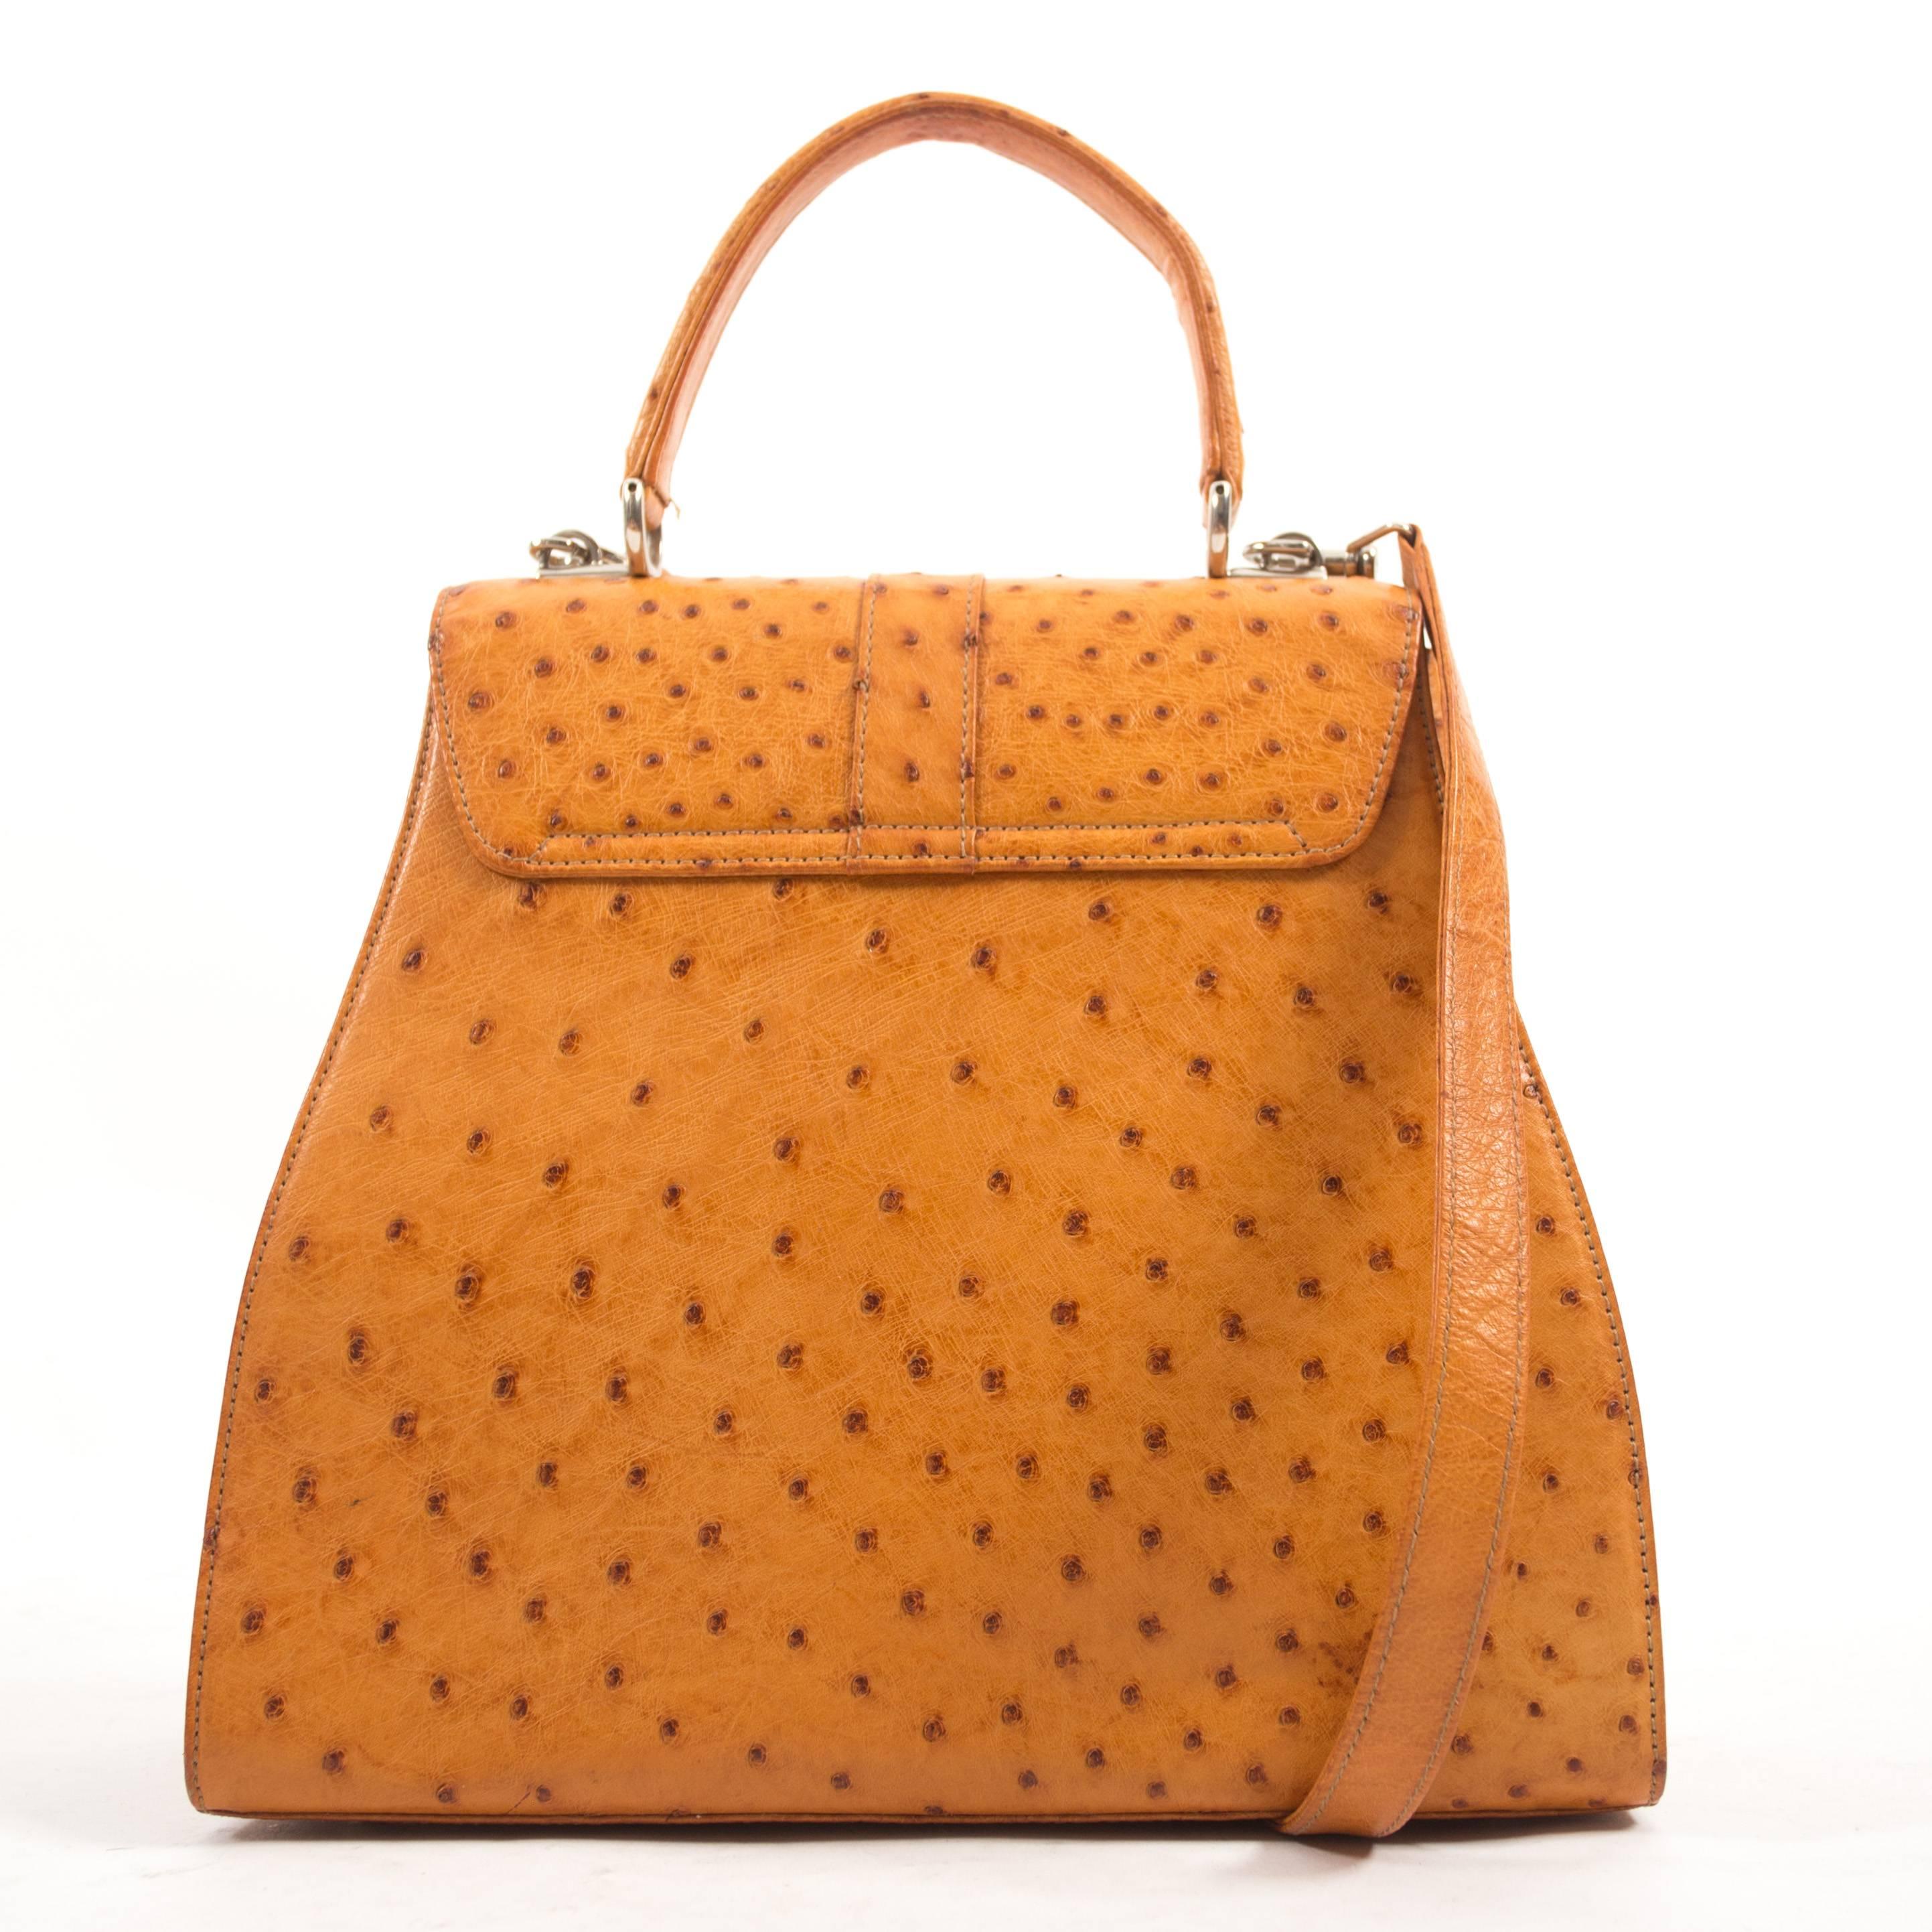 Orange Gucci 1970s tan ostrich leather hand bag with shoulder strap